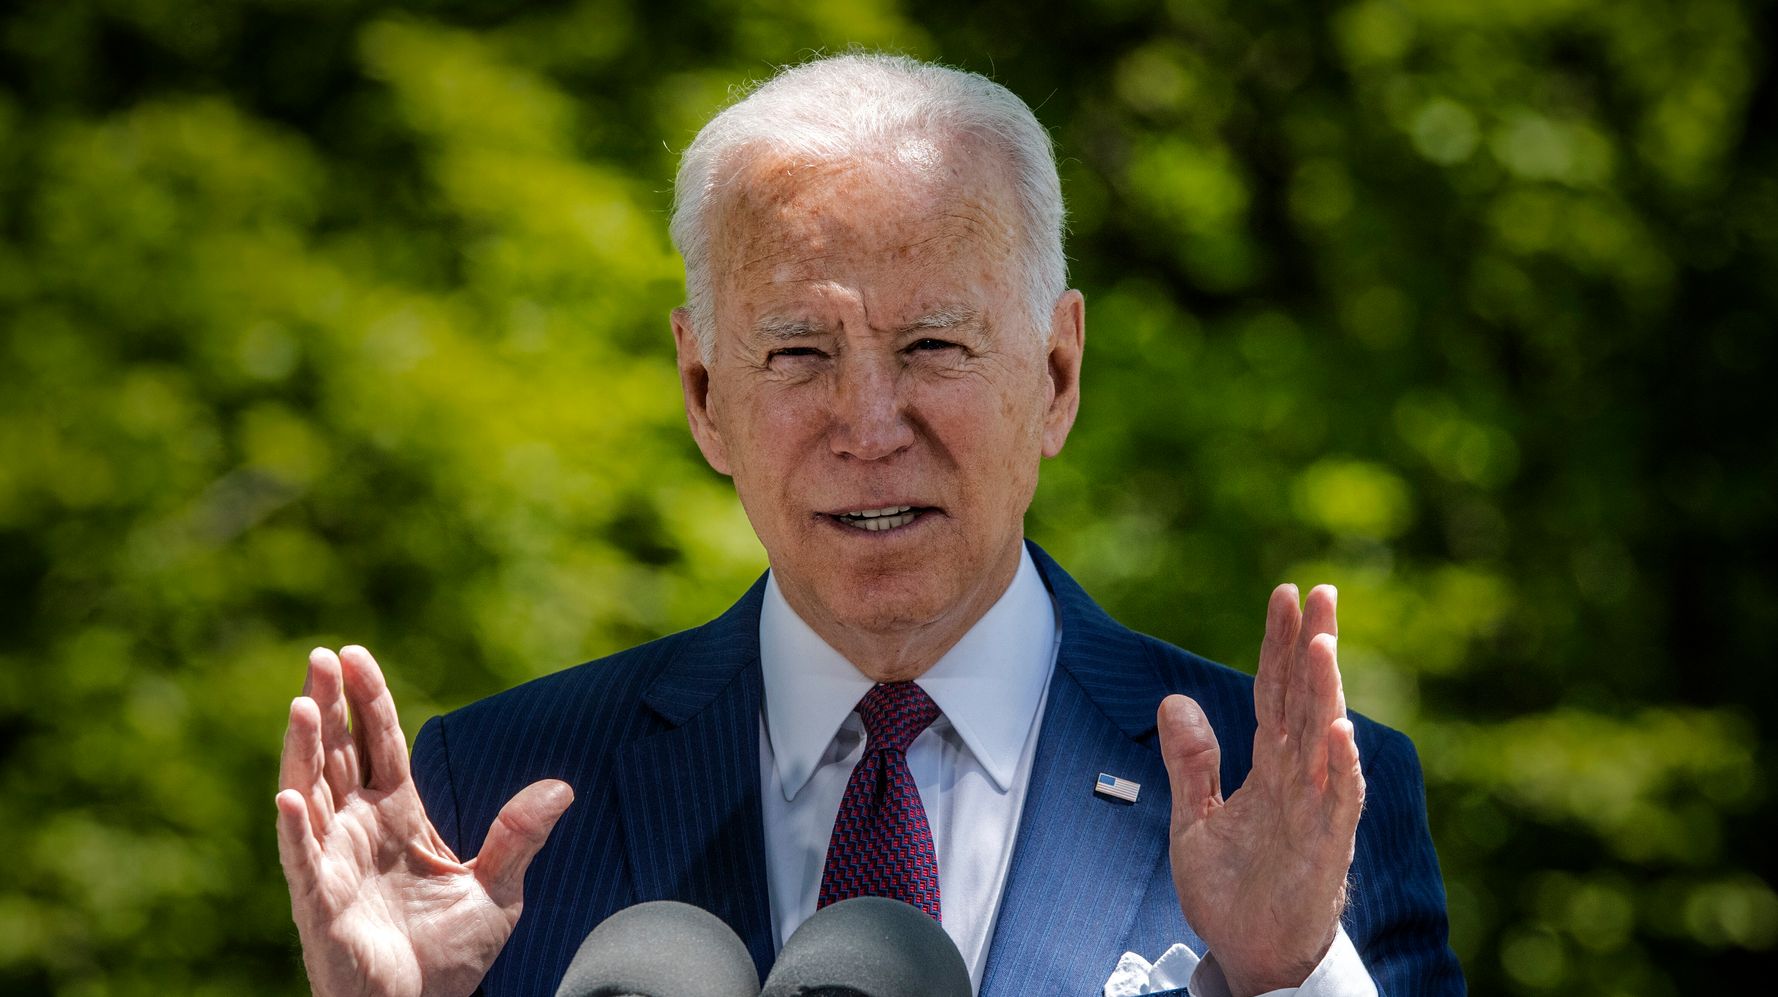 Biden Moves To Restore Endangered Species Protections Eroded By Trump